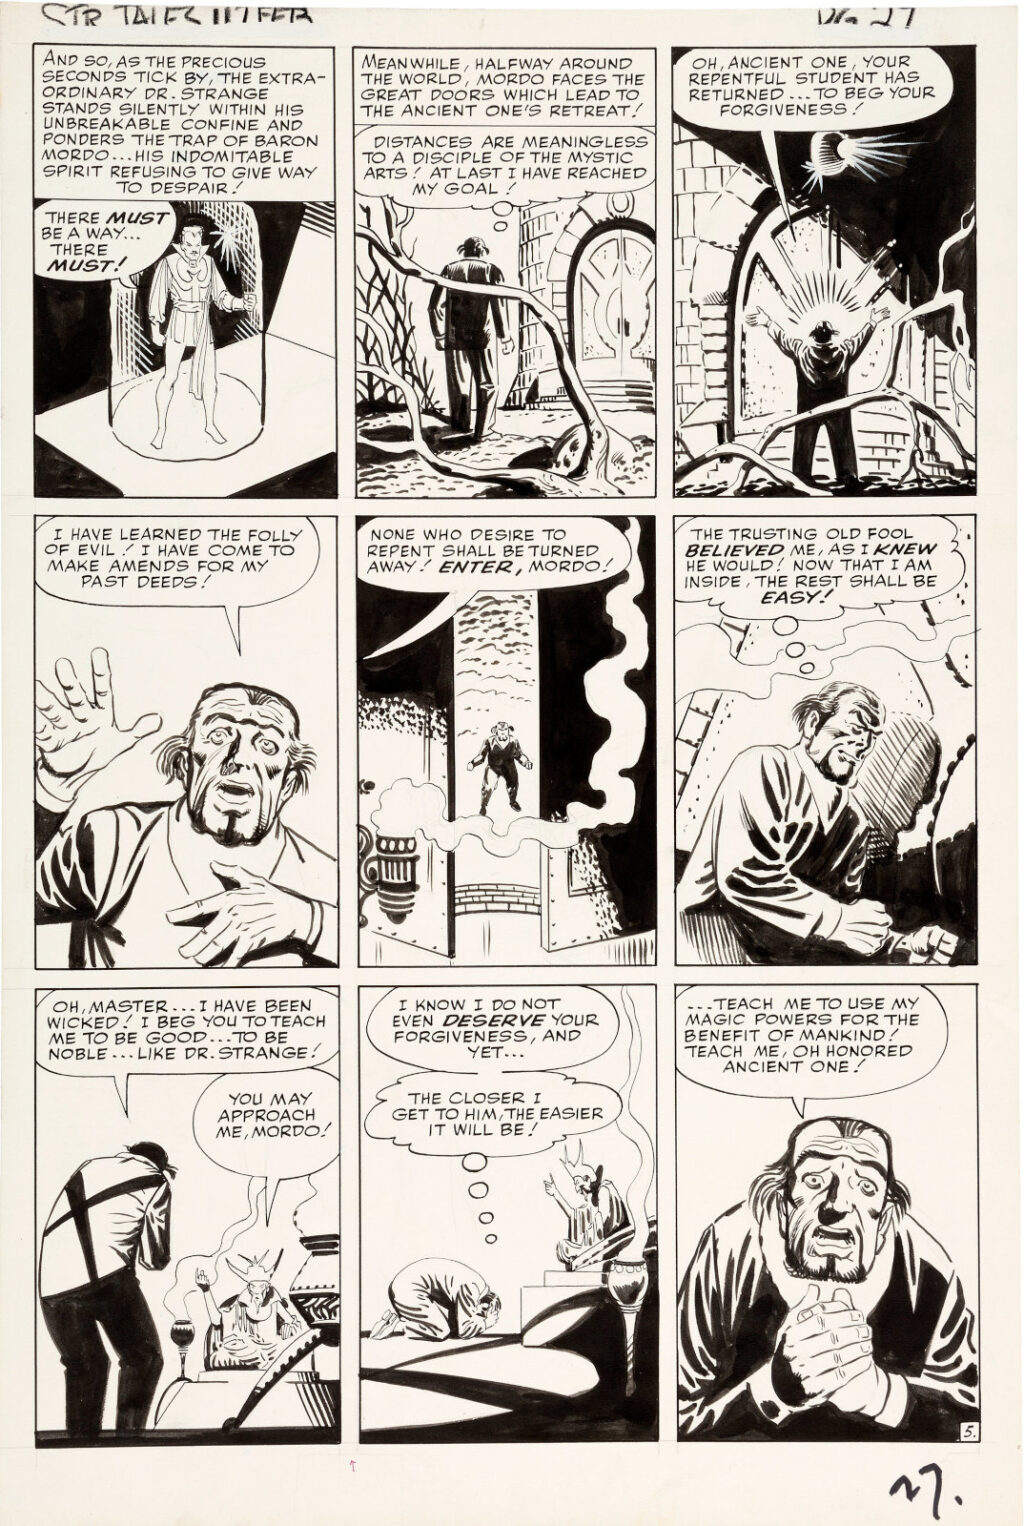 Strange Tales issue 117 page 5 by Steve Ditko